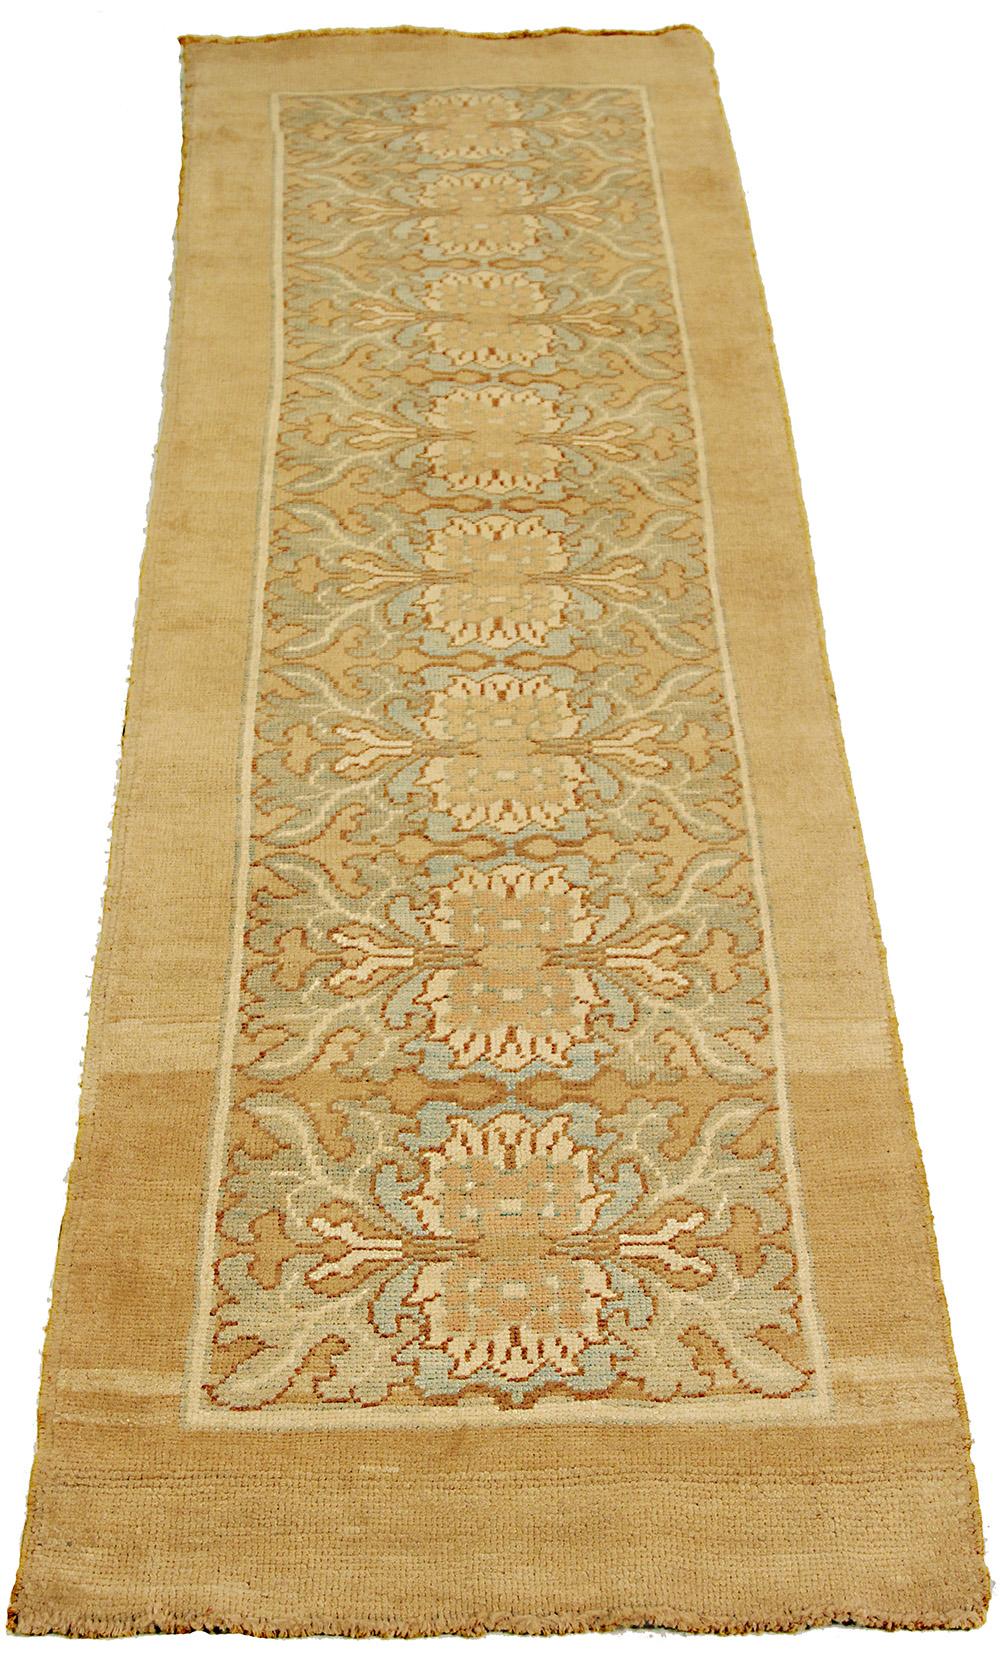 New handmade Turkish runner rug from high-quality sheep’s wool and colored with eco-friendly vegetable dyes that are proven safe for humans and pets alike. It’s a Donegal design showcasing a beige field with blue, ivory and green floral details.